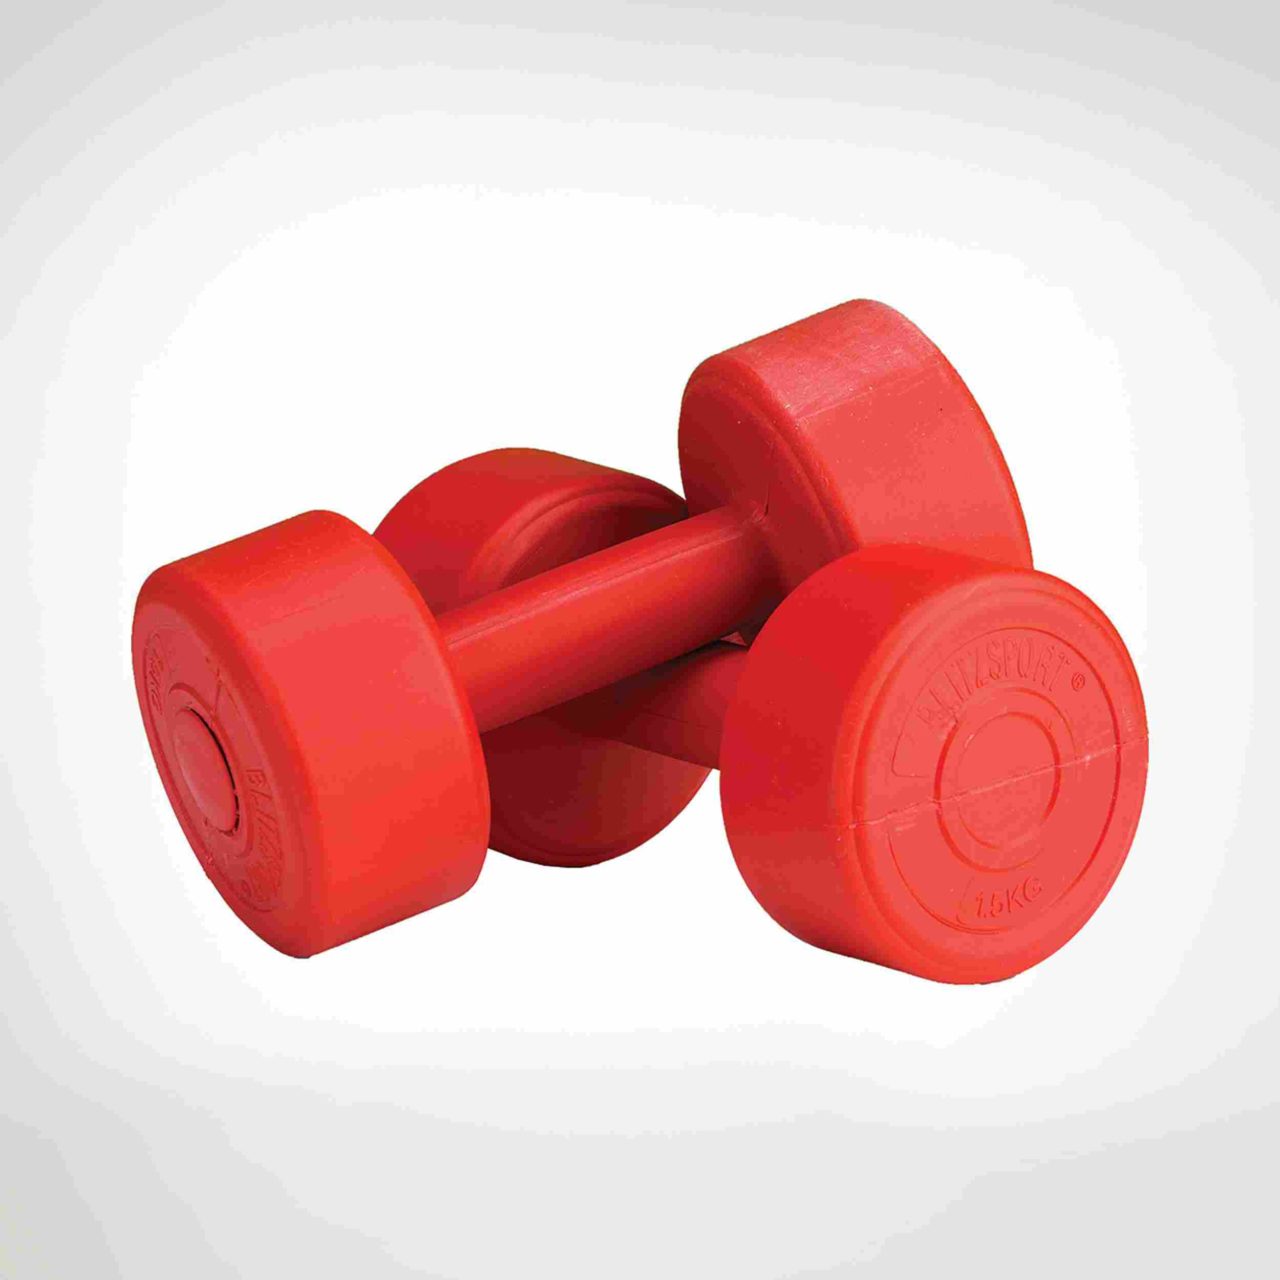 product-dumbells-red-1280x1280.jpg